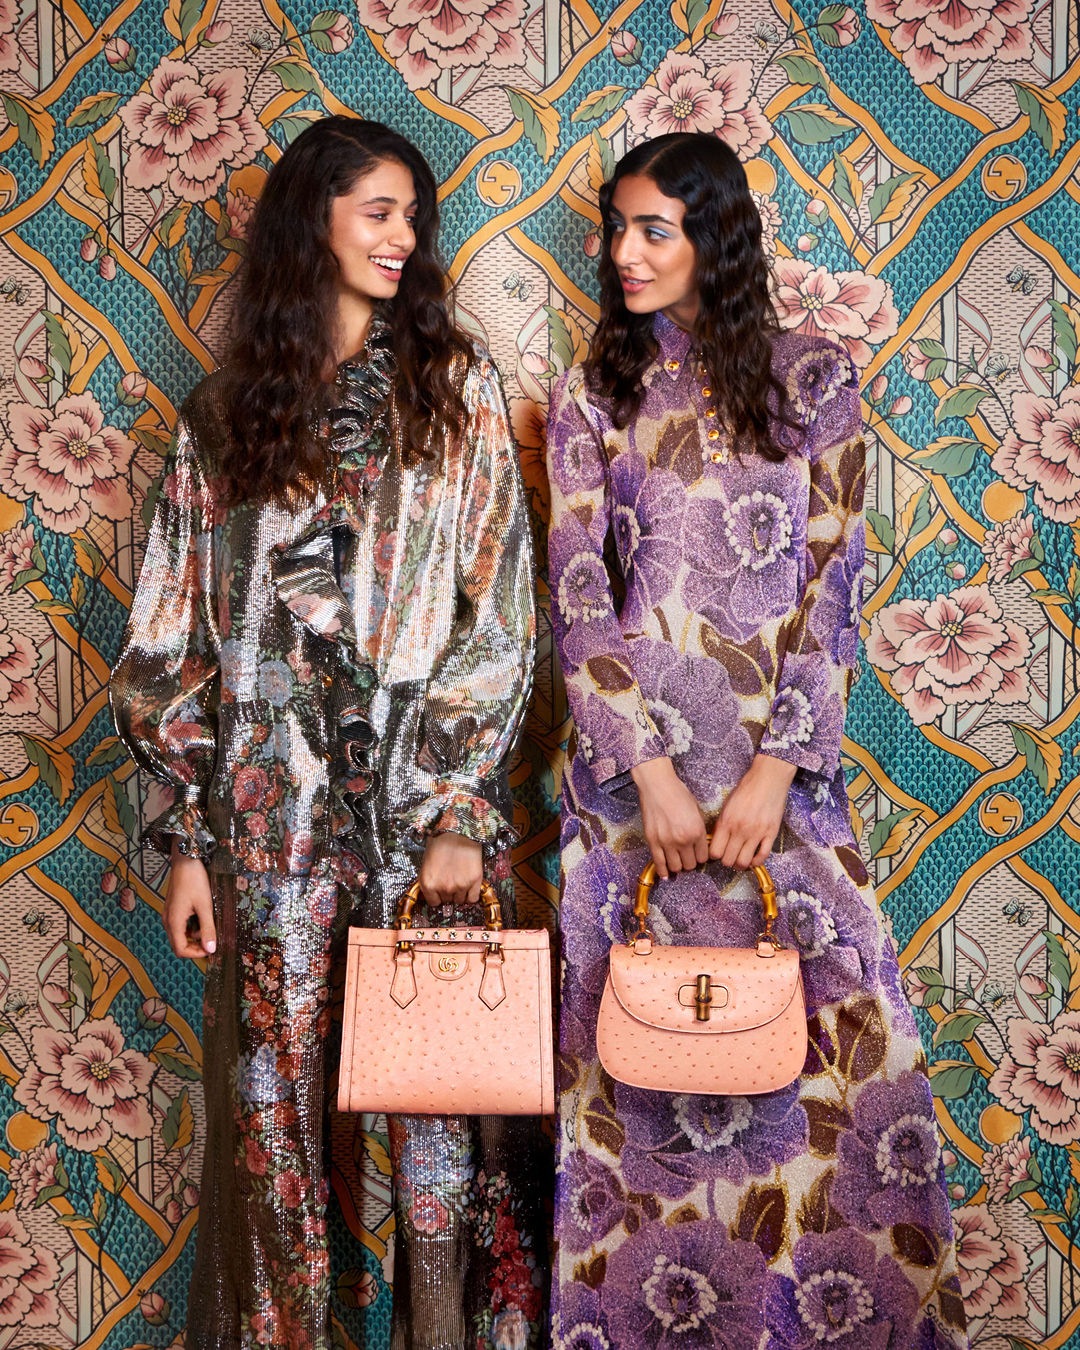 From Louis Vuitton to Gucci, luxury brands are catering to the affluent  Middle East market with Ramadan fashion